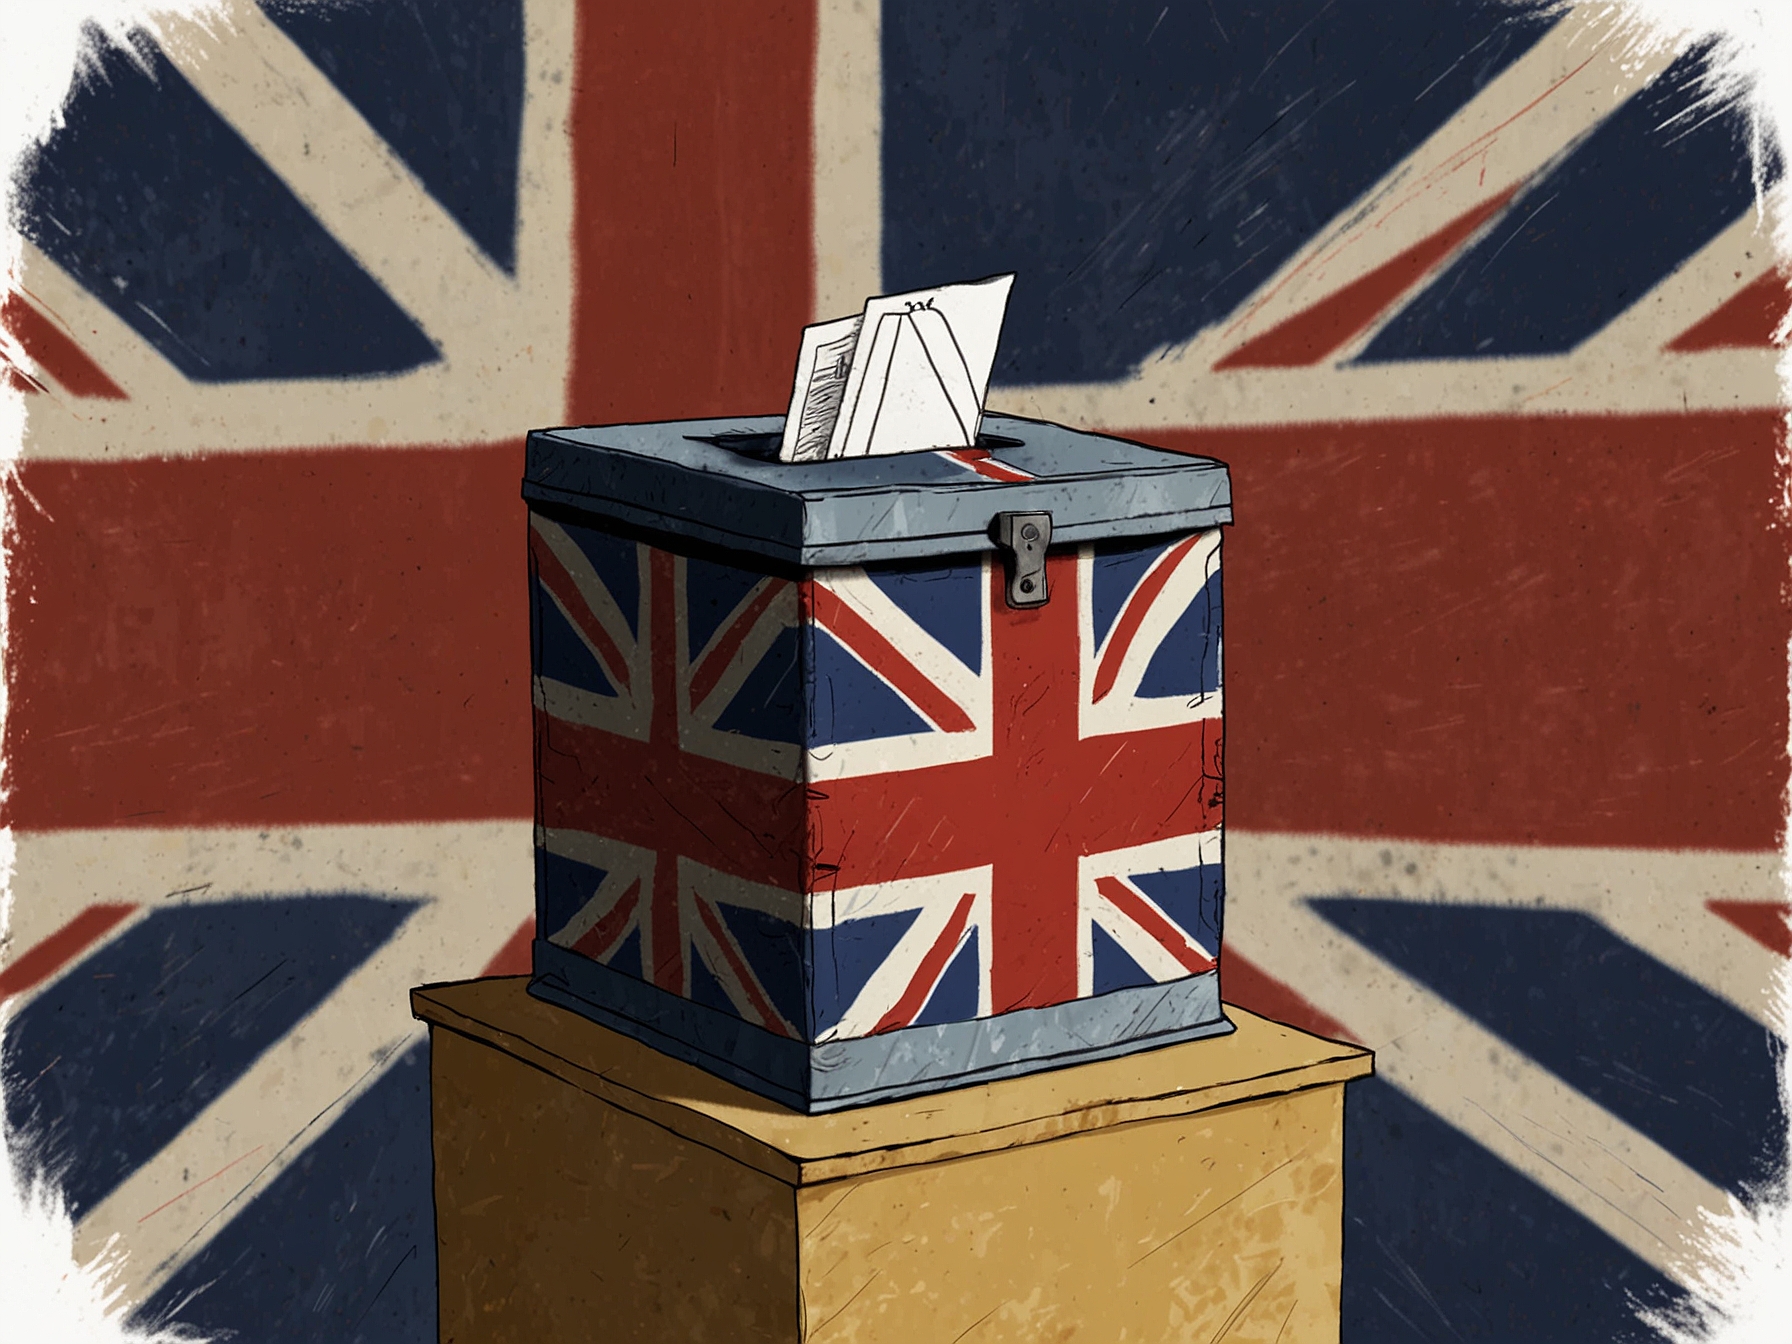 An illustration of a ballot box with the Union Jack in the background, representing the critical decision British voters face concerning Labour’s proposed policies in the upcoming General Election.